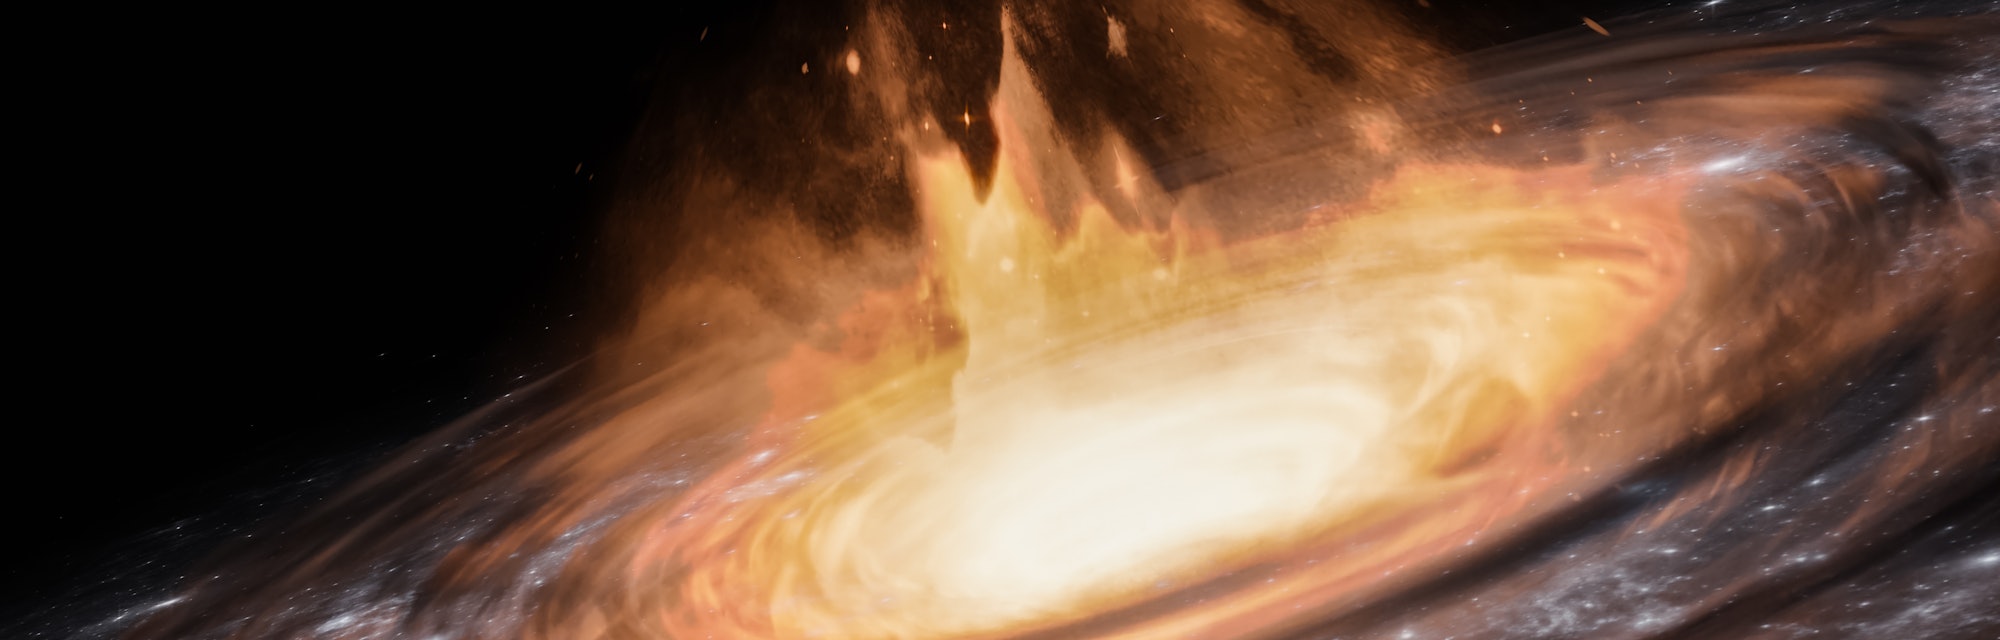 Quasar or black hole with accretion disk and gas clouds 3D rendering illustration. Outer space or sp...